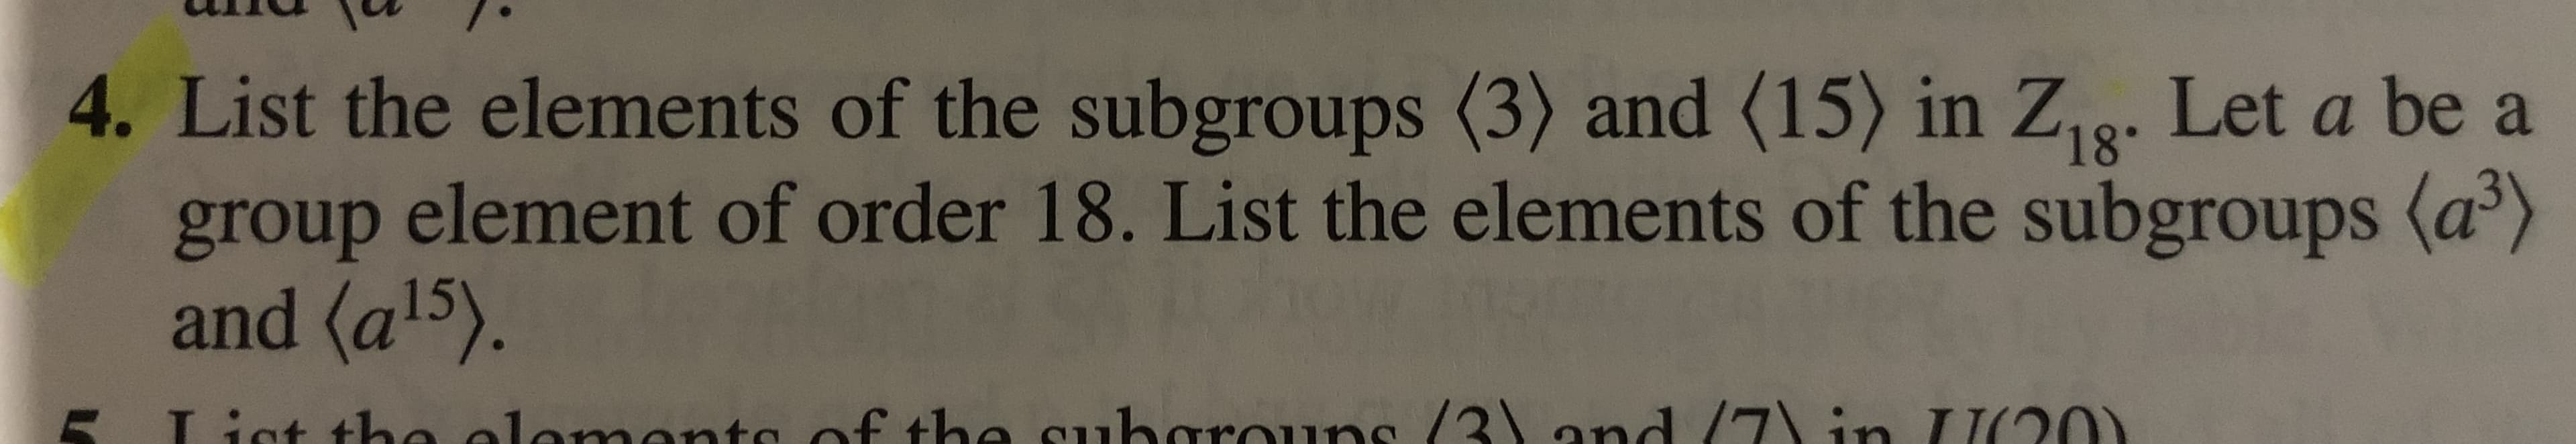 4. List the elements of the subgroups (3) and (15) in Z18. Let a be a
group element of order 18. List the elements of the subgroups (a)
and (a15).
Lict tha alamanto
e /21 and /7in I20
af the charaun
